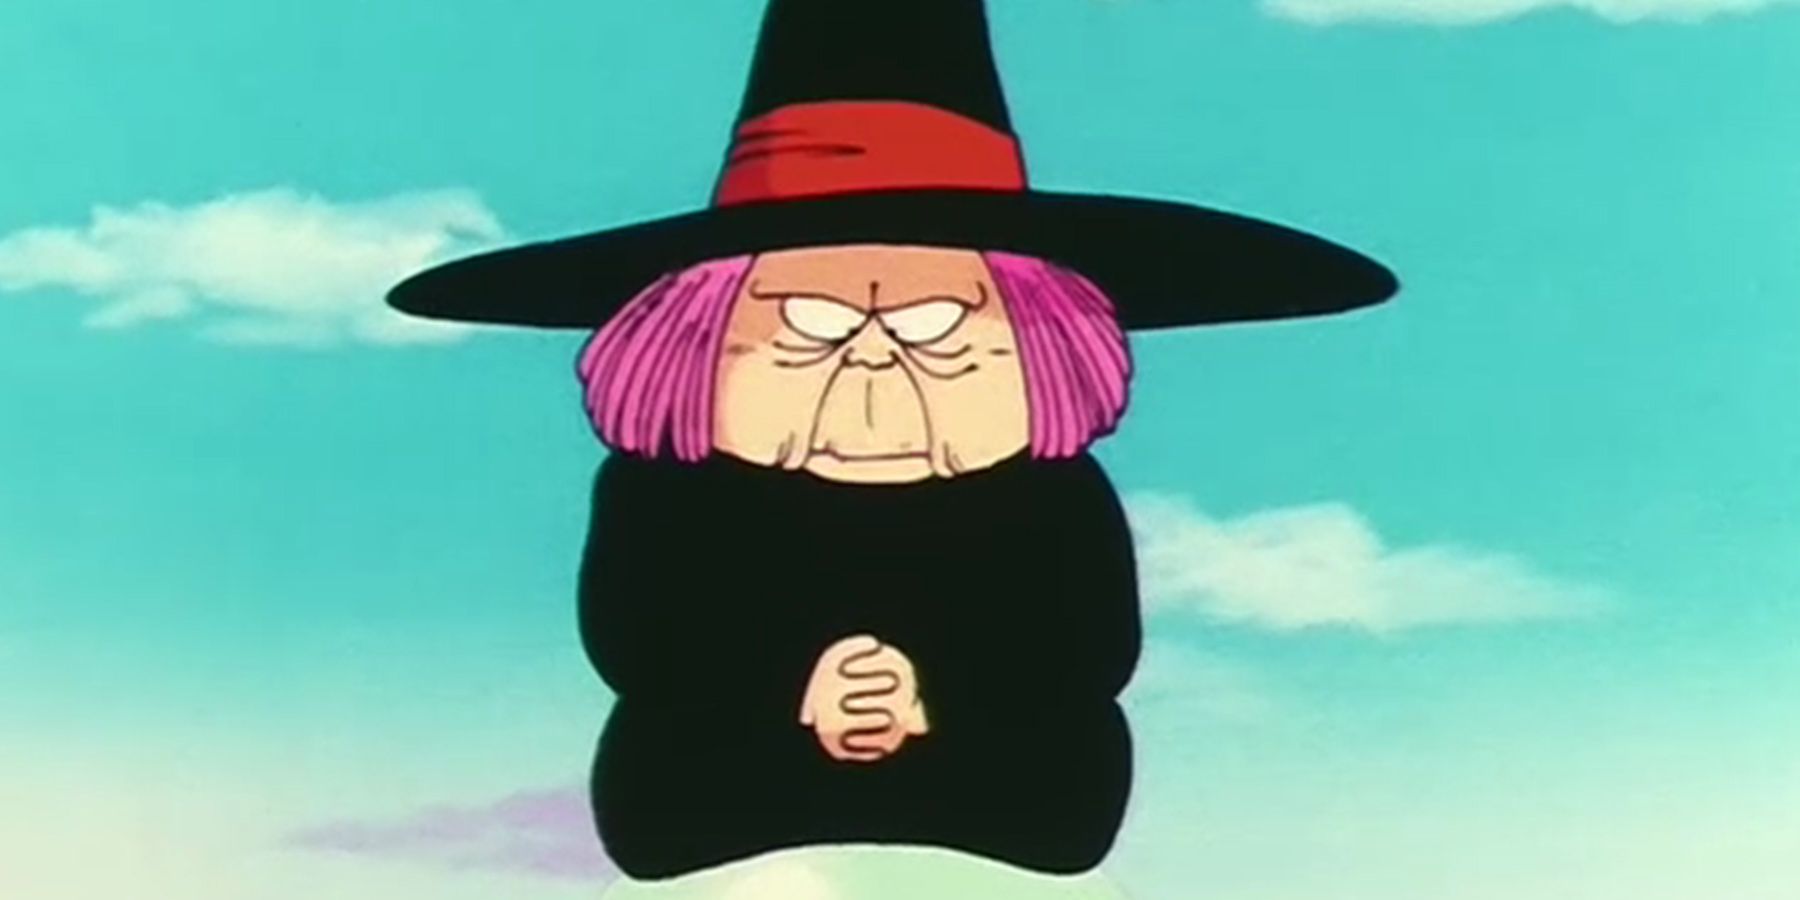 Fortuneteller Baba from Dragon Ball floating and looking downward